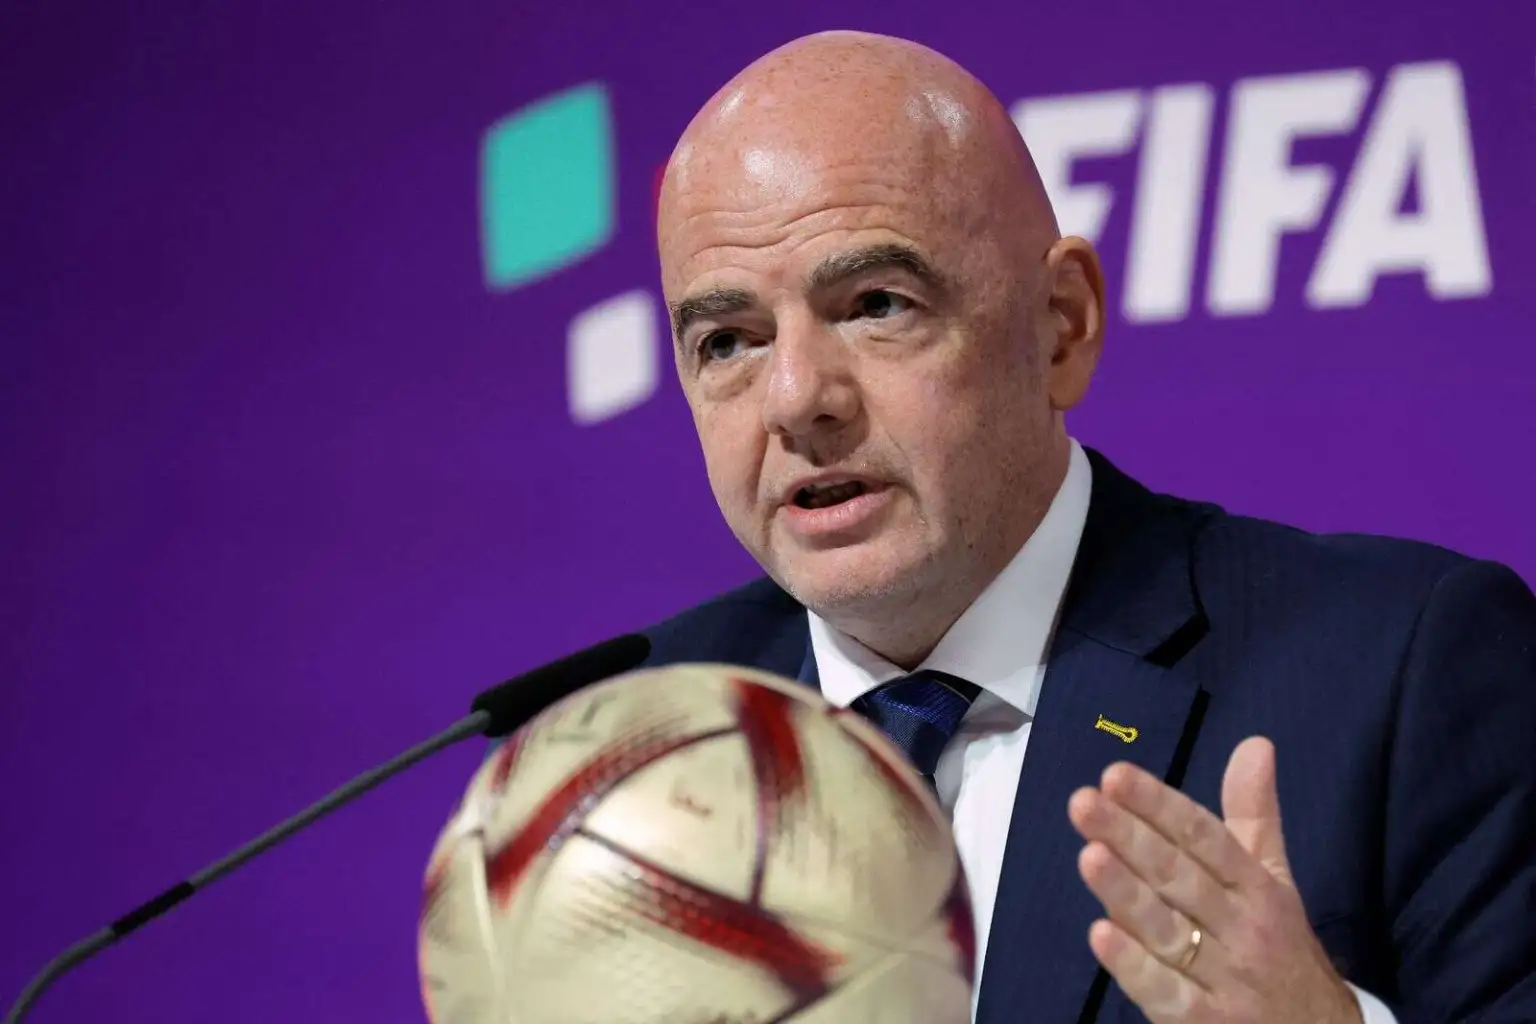 Infantino re-elected for third four-year term as FIFA President